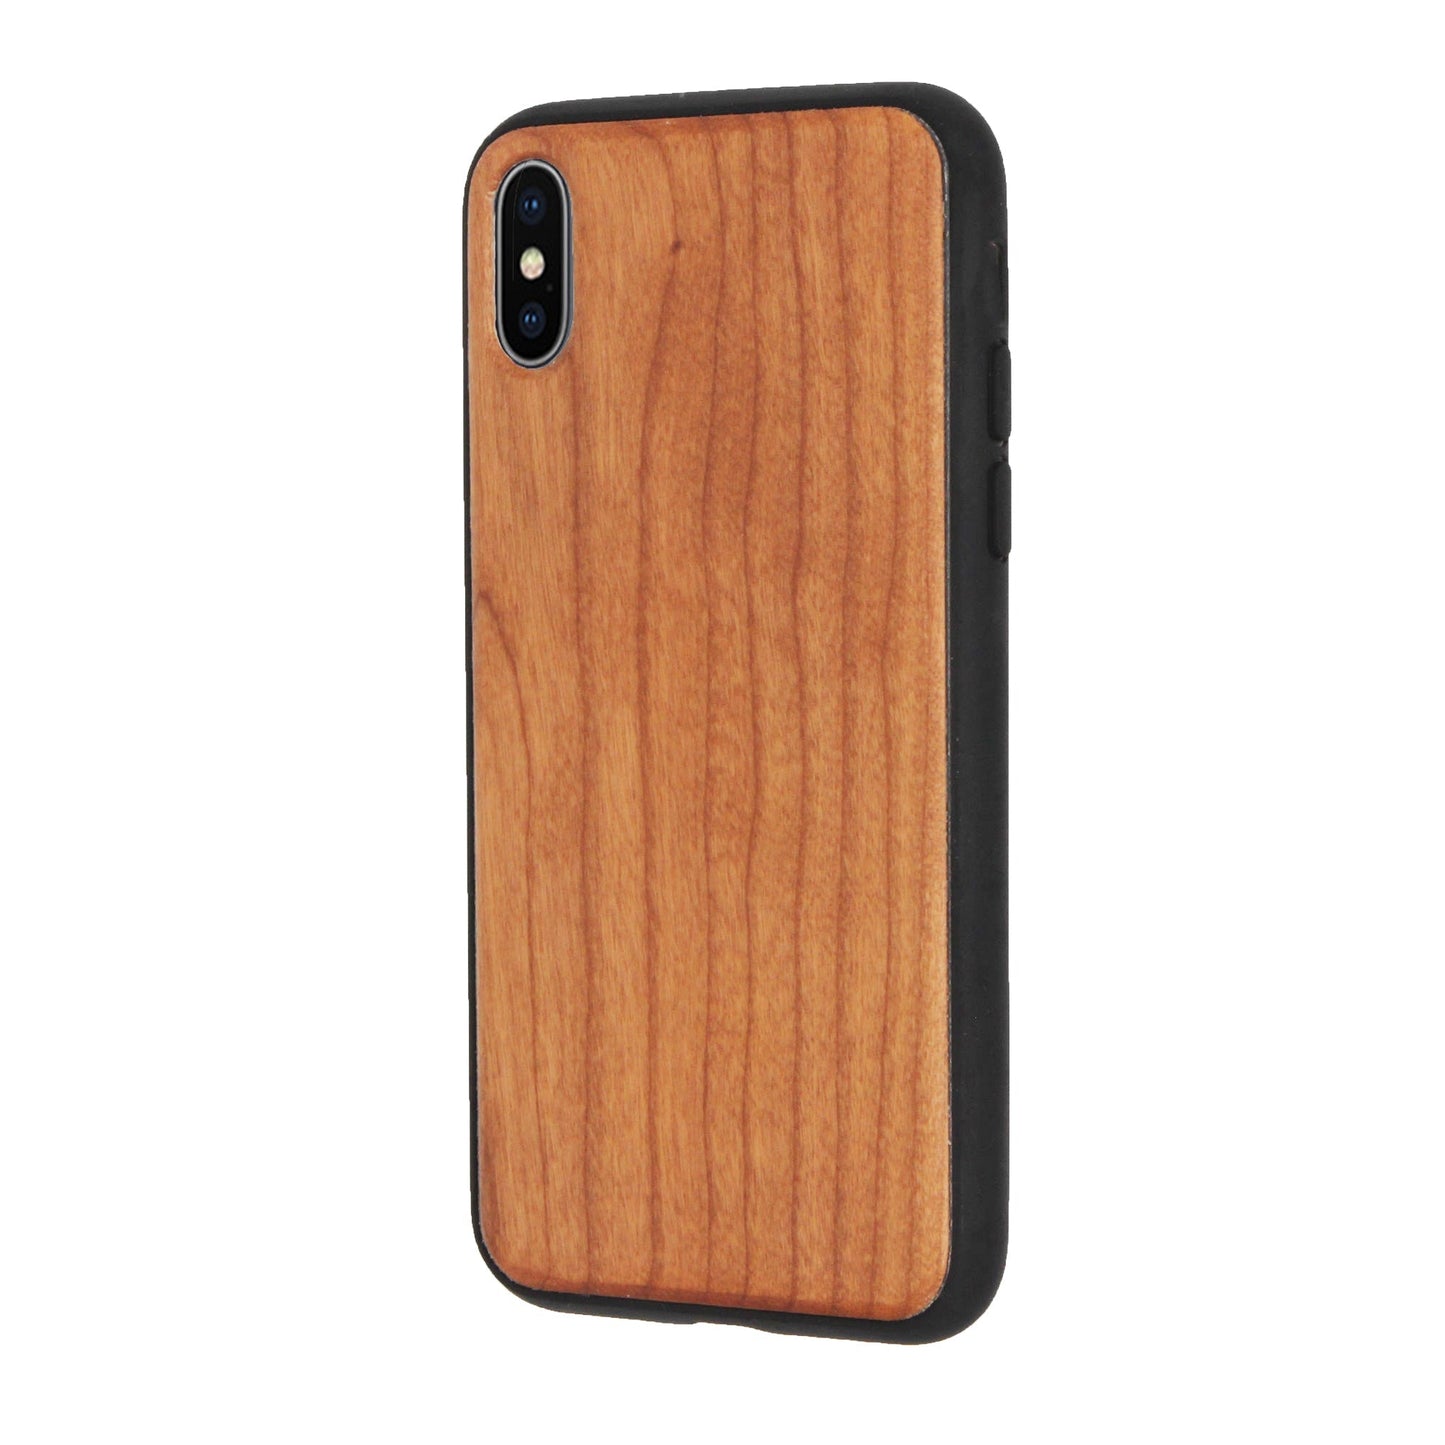 Eden case made of cherry wood for iPhone X/XS